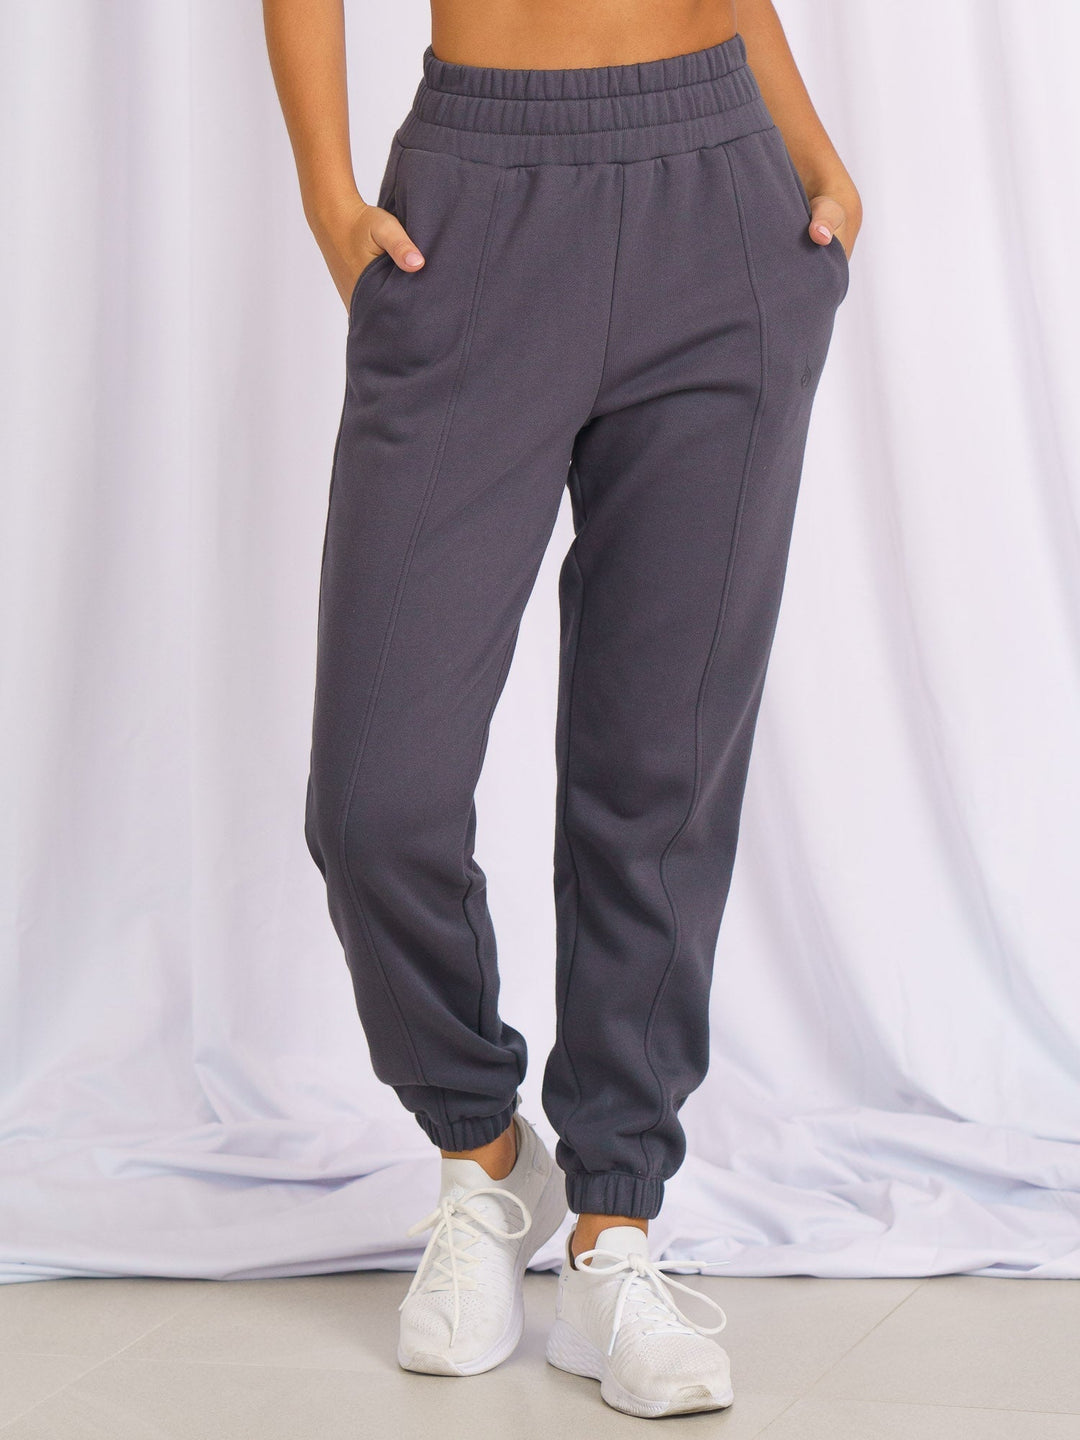 Revive Trackpants - Charcoal Clothing Ryderwear 